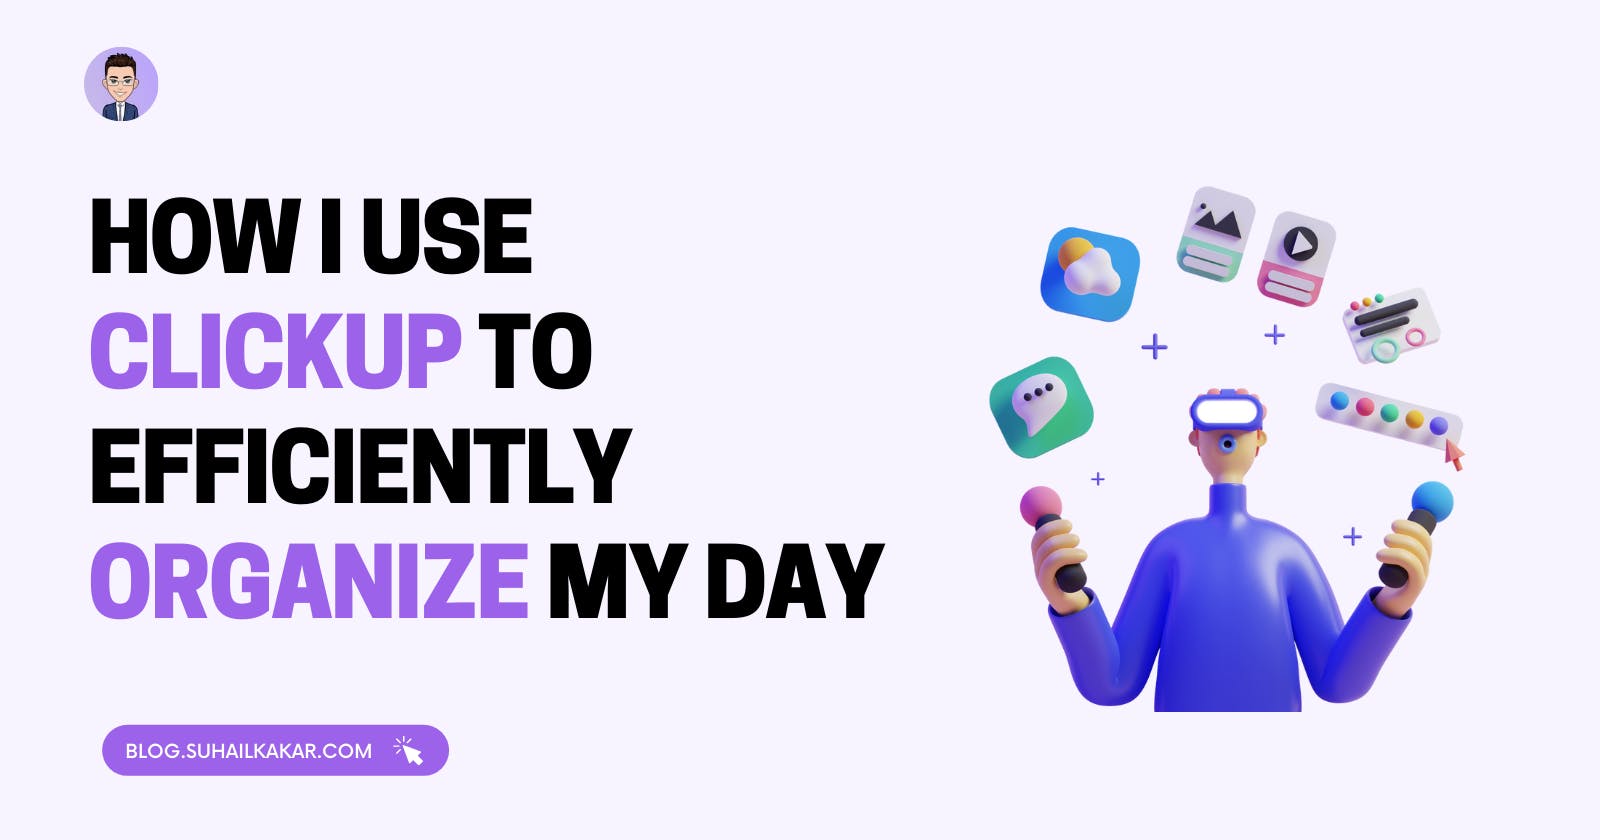 How I use ClickUp to efficiently organize my day